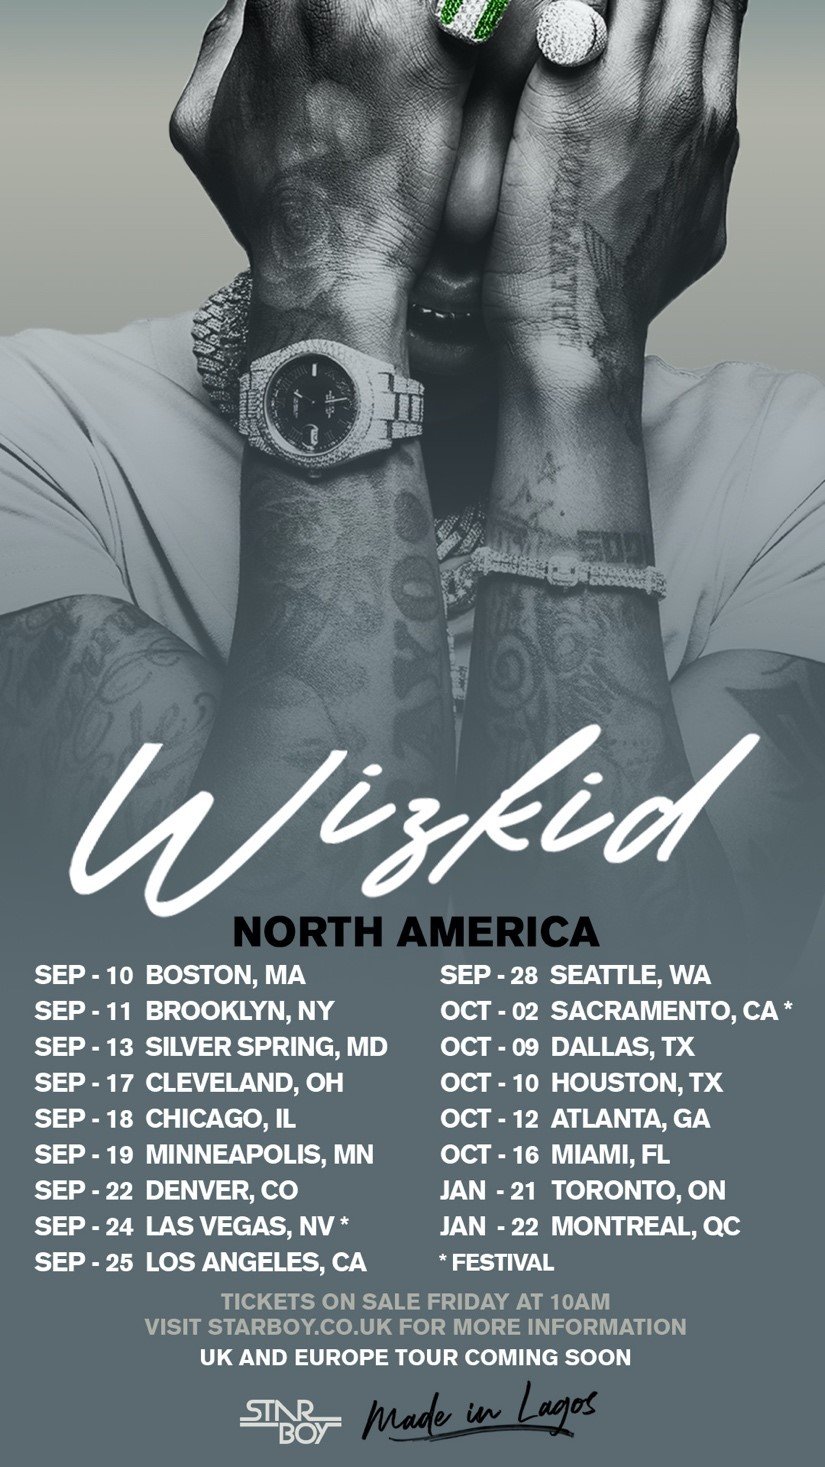 WIZKID ANNOUNCES HIS HIGHLY ANTICIPATED MADE IN LAGOS NORTH AMERICAN